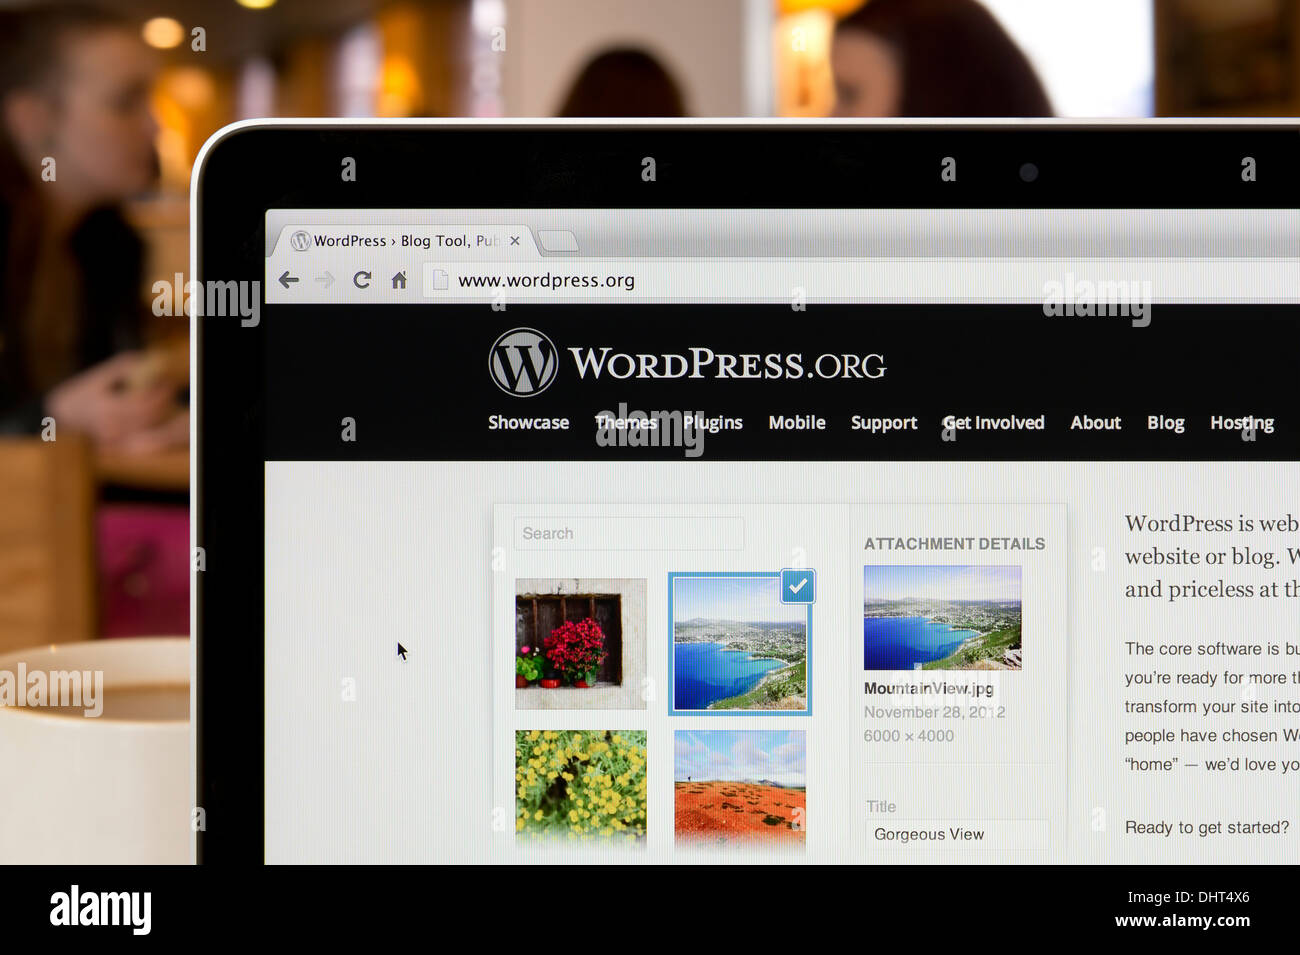 The WordPress website shot in a coffee shop environment (Editorial use only: print, TV, e-book and editorial website). Stock Photo